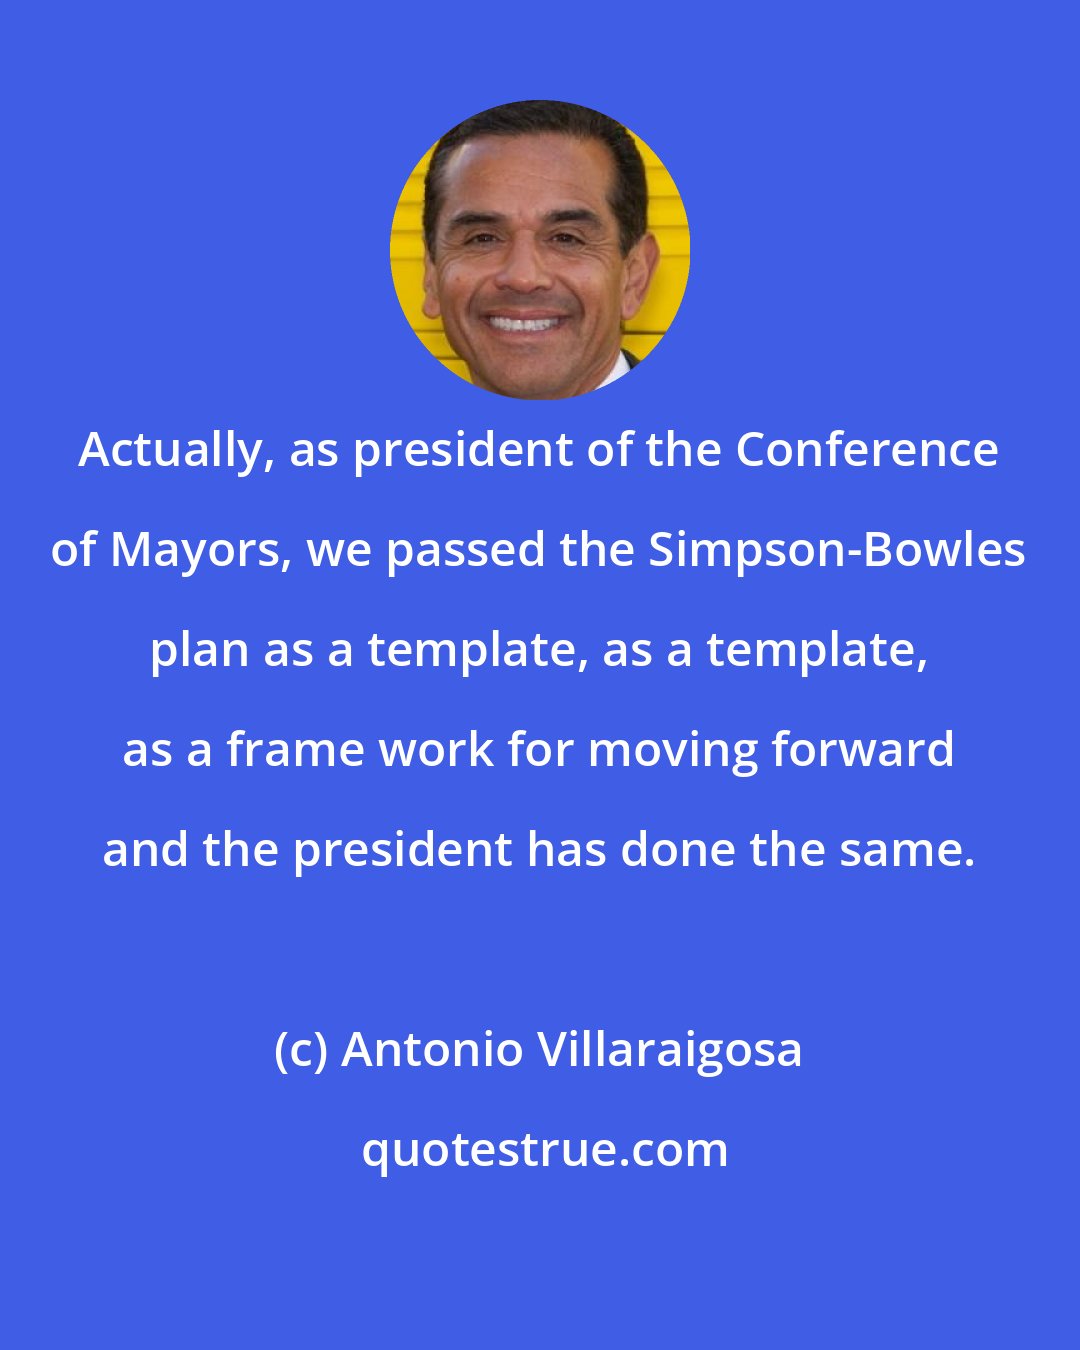 Antonio Villaraigosa: Actually, as president of the Conference of Mayors, we passed the Simpson-Bowles plan as a template, as a template, as a frame work for moving forward and the president has done the same.